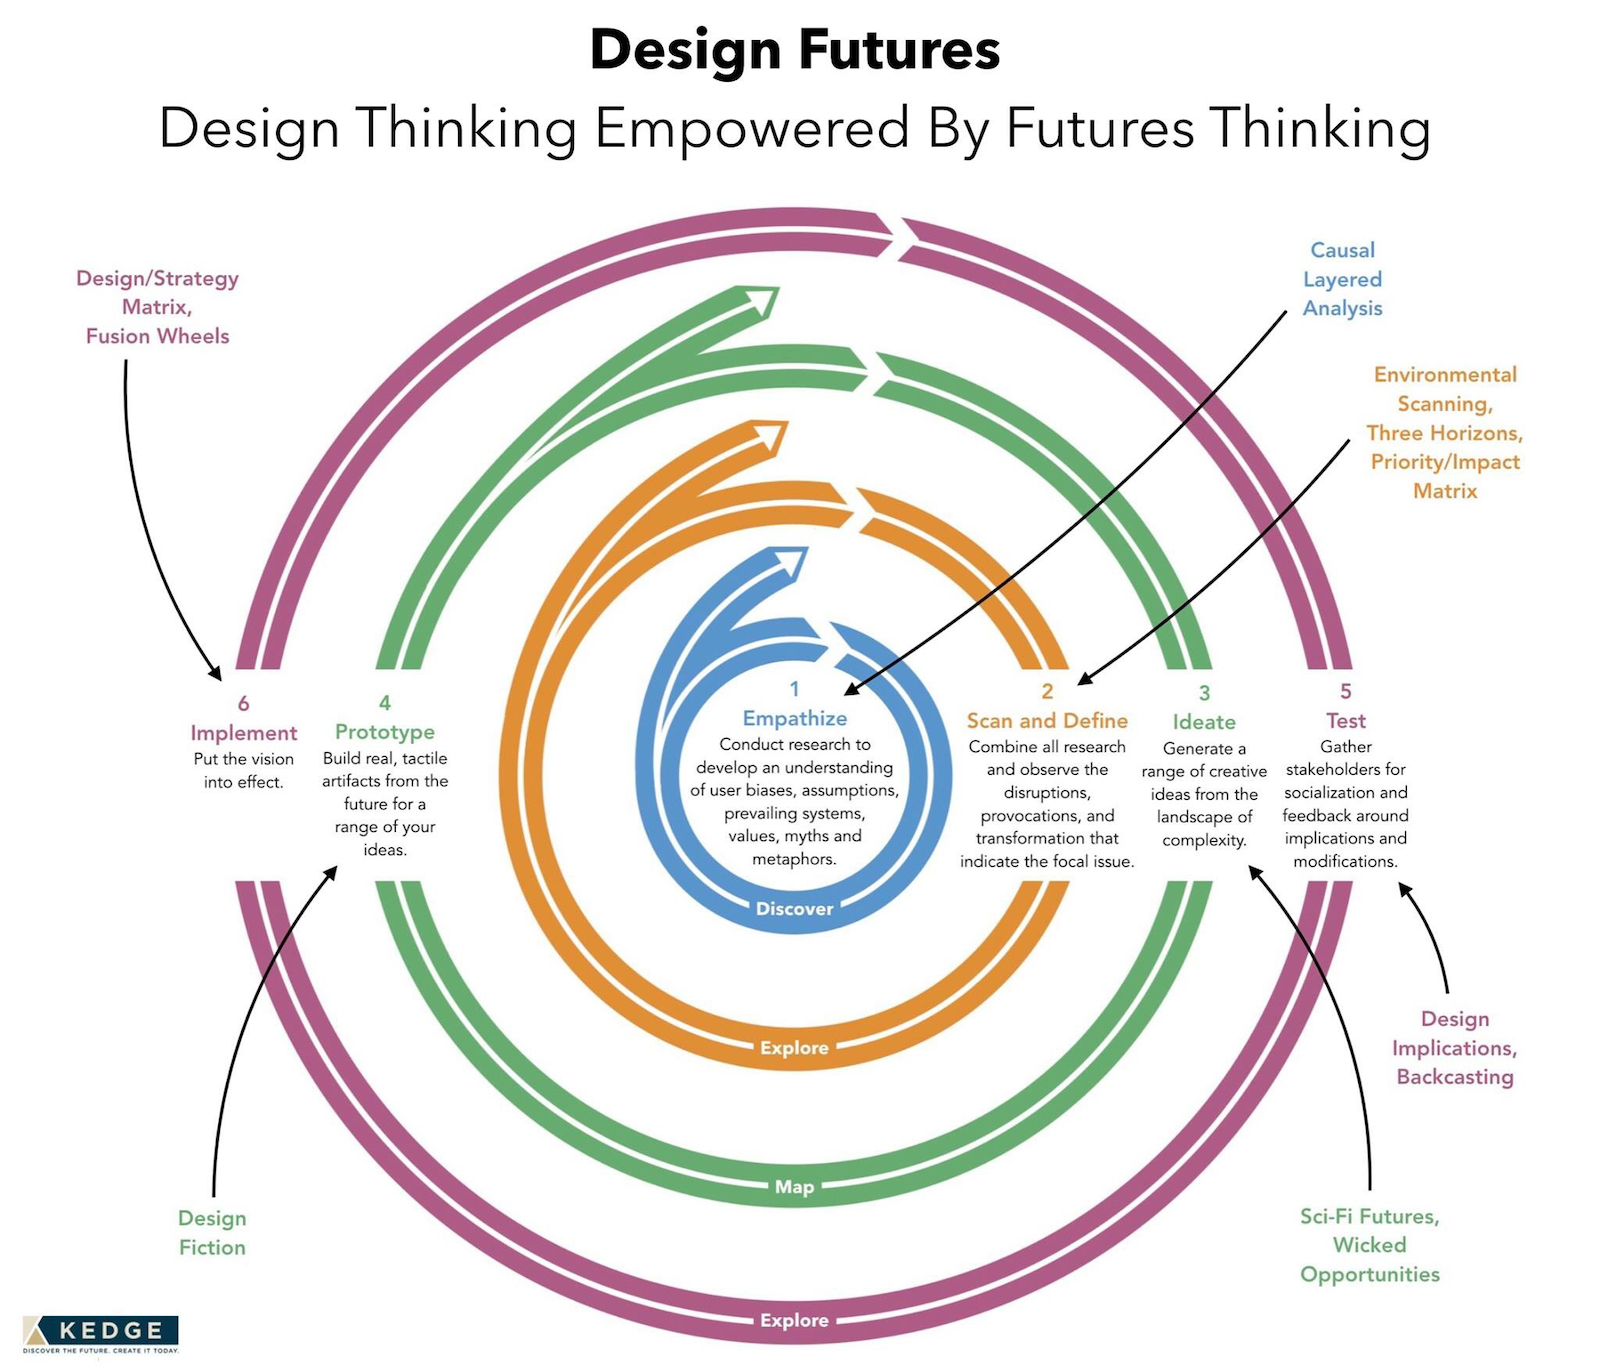 Design Thinking: Ideate - System Concepts Ltd. Making places